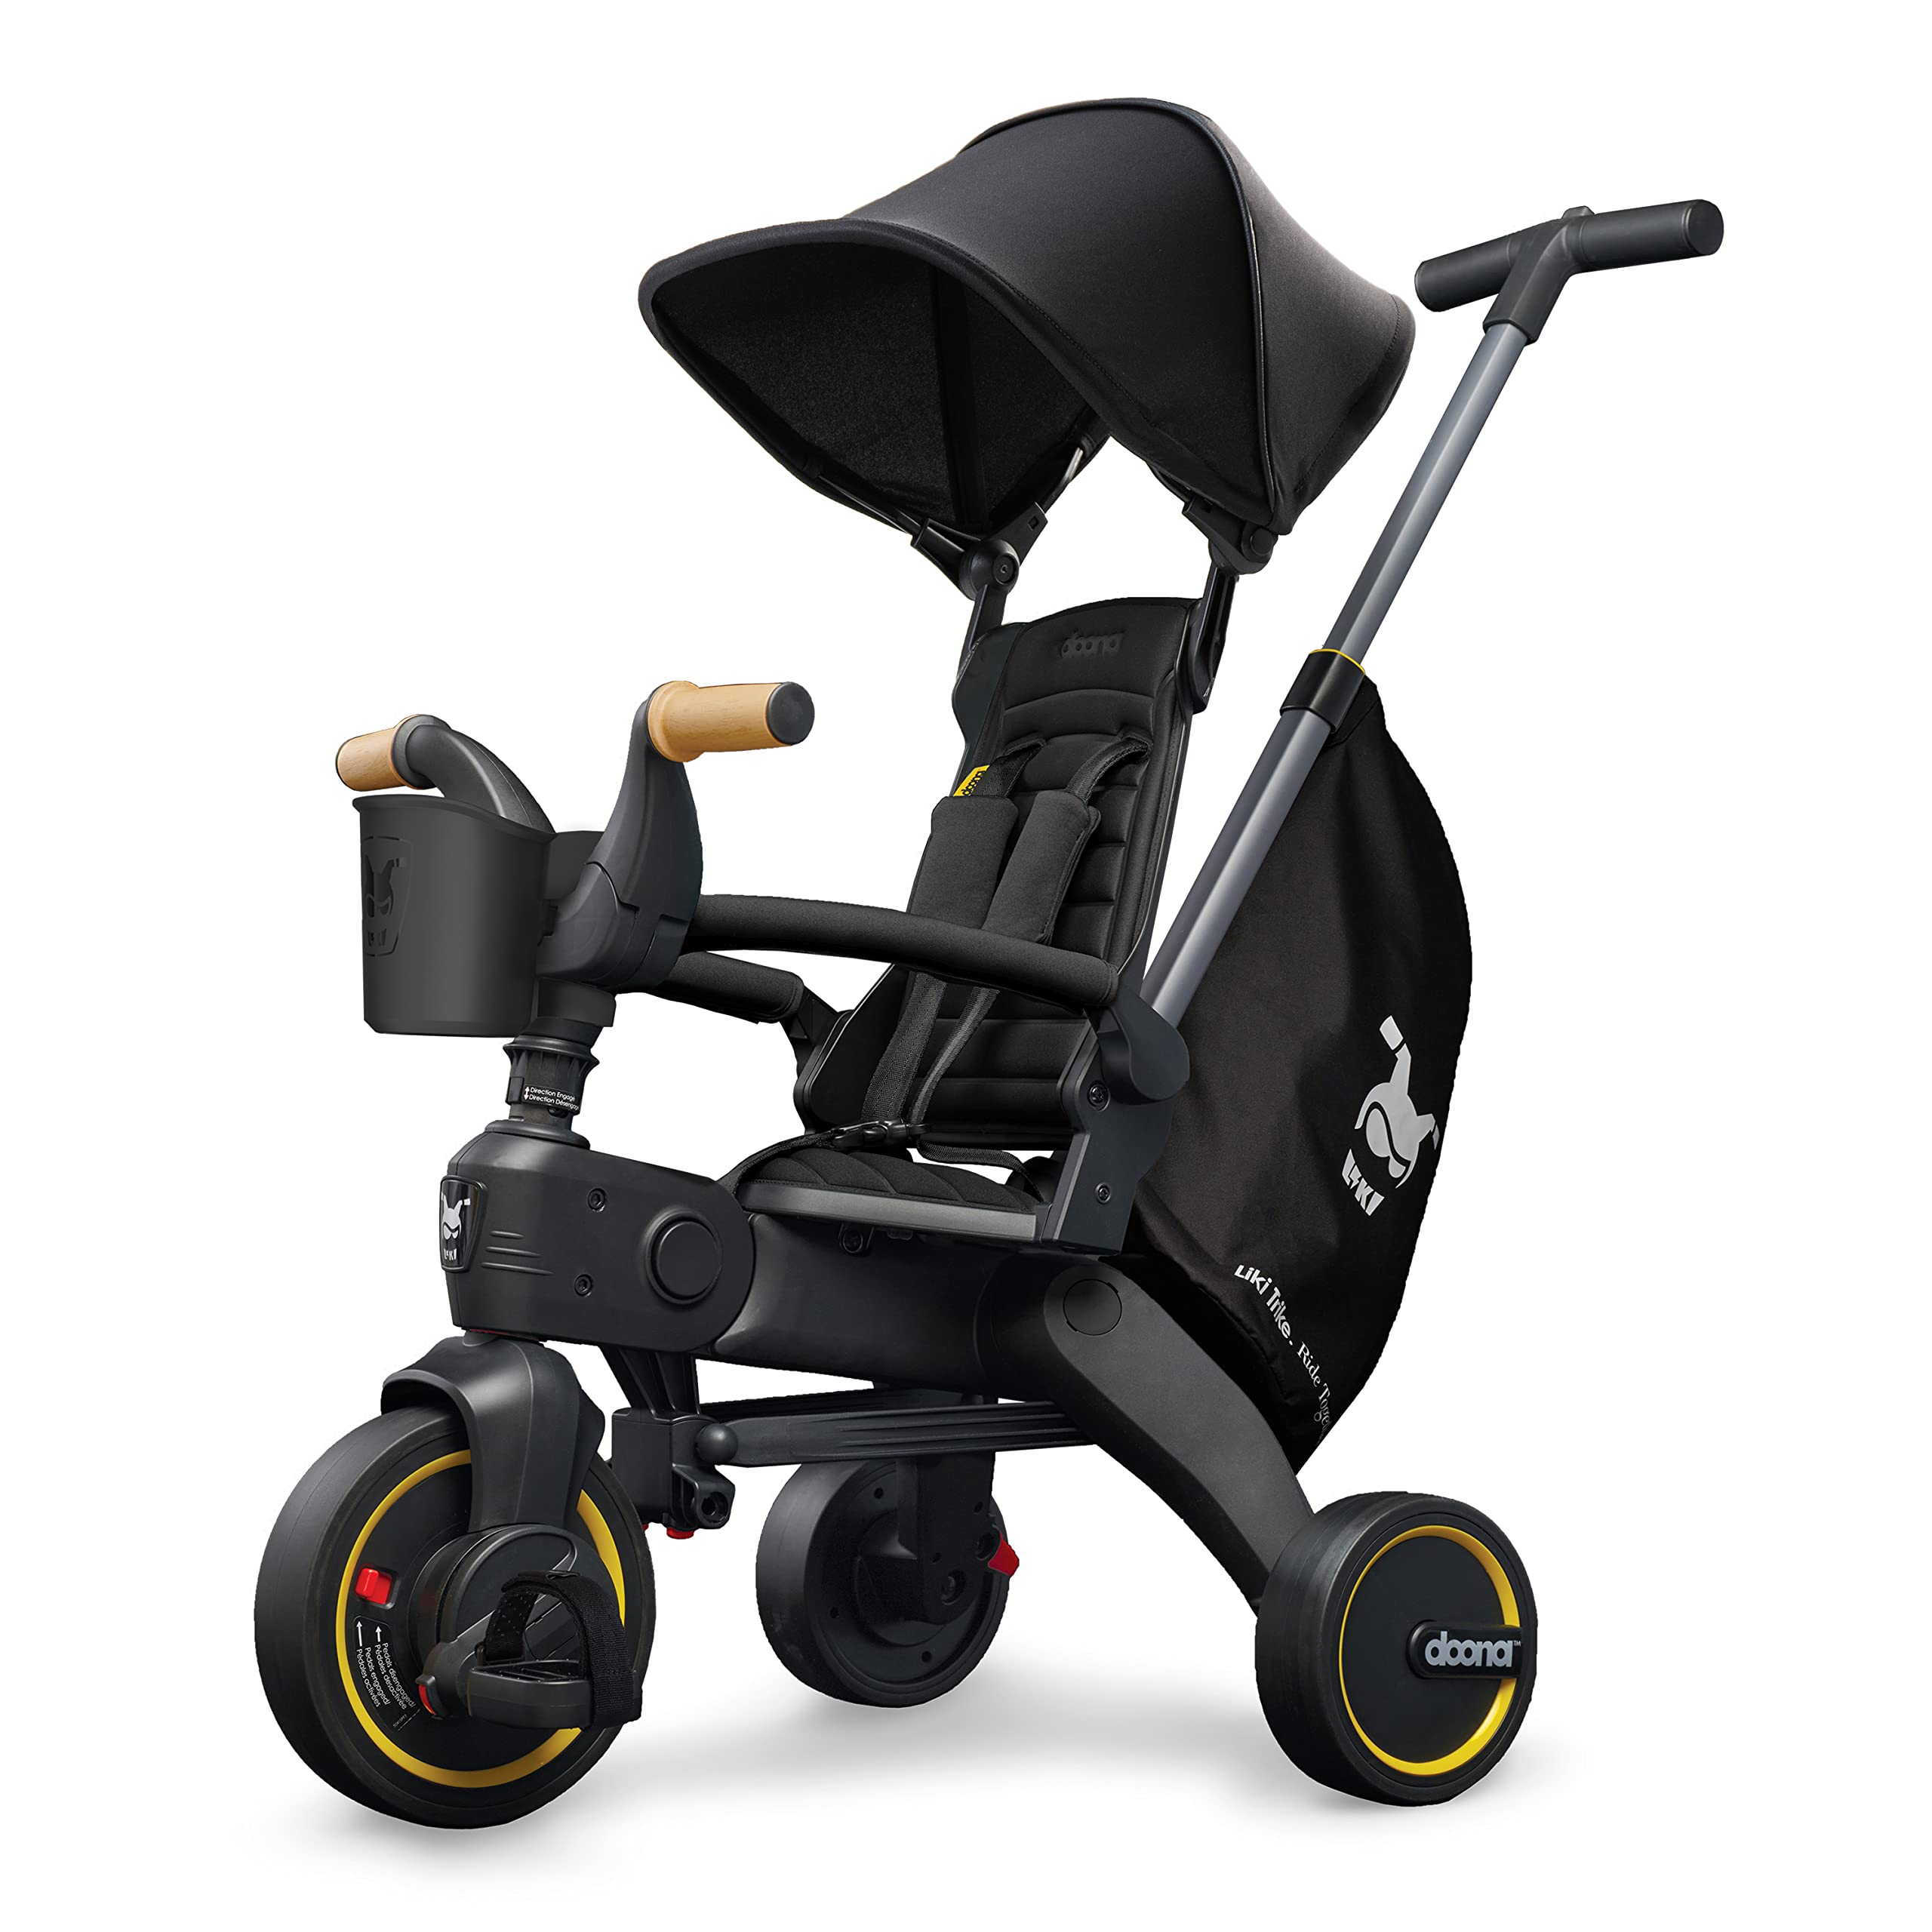 👍Premium Foldable Trike for Toddlers, Toddler Tricycle Stroller